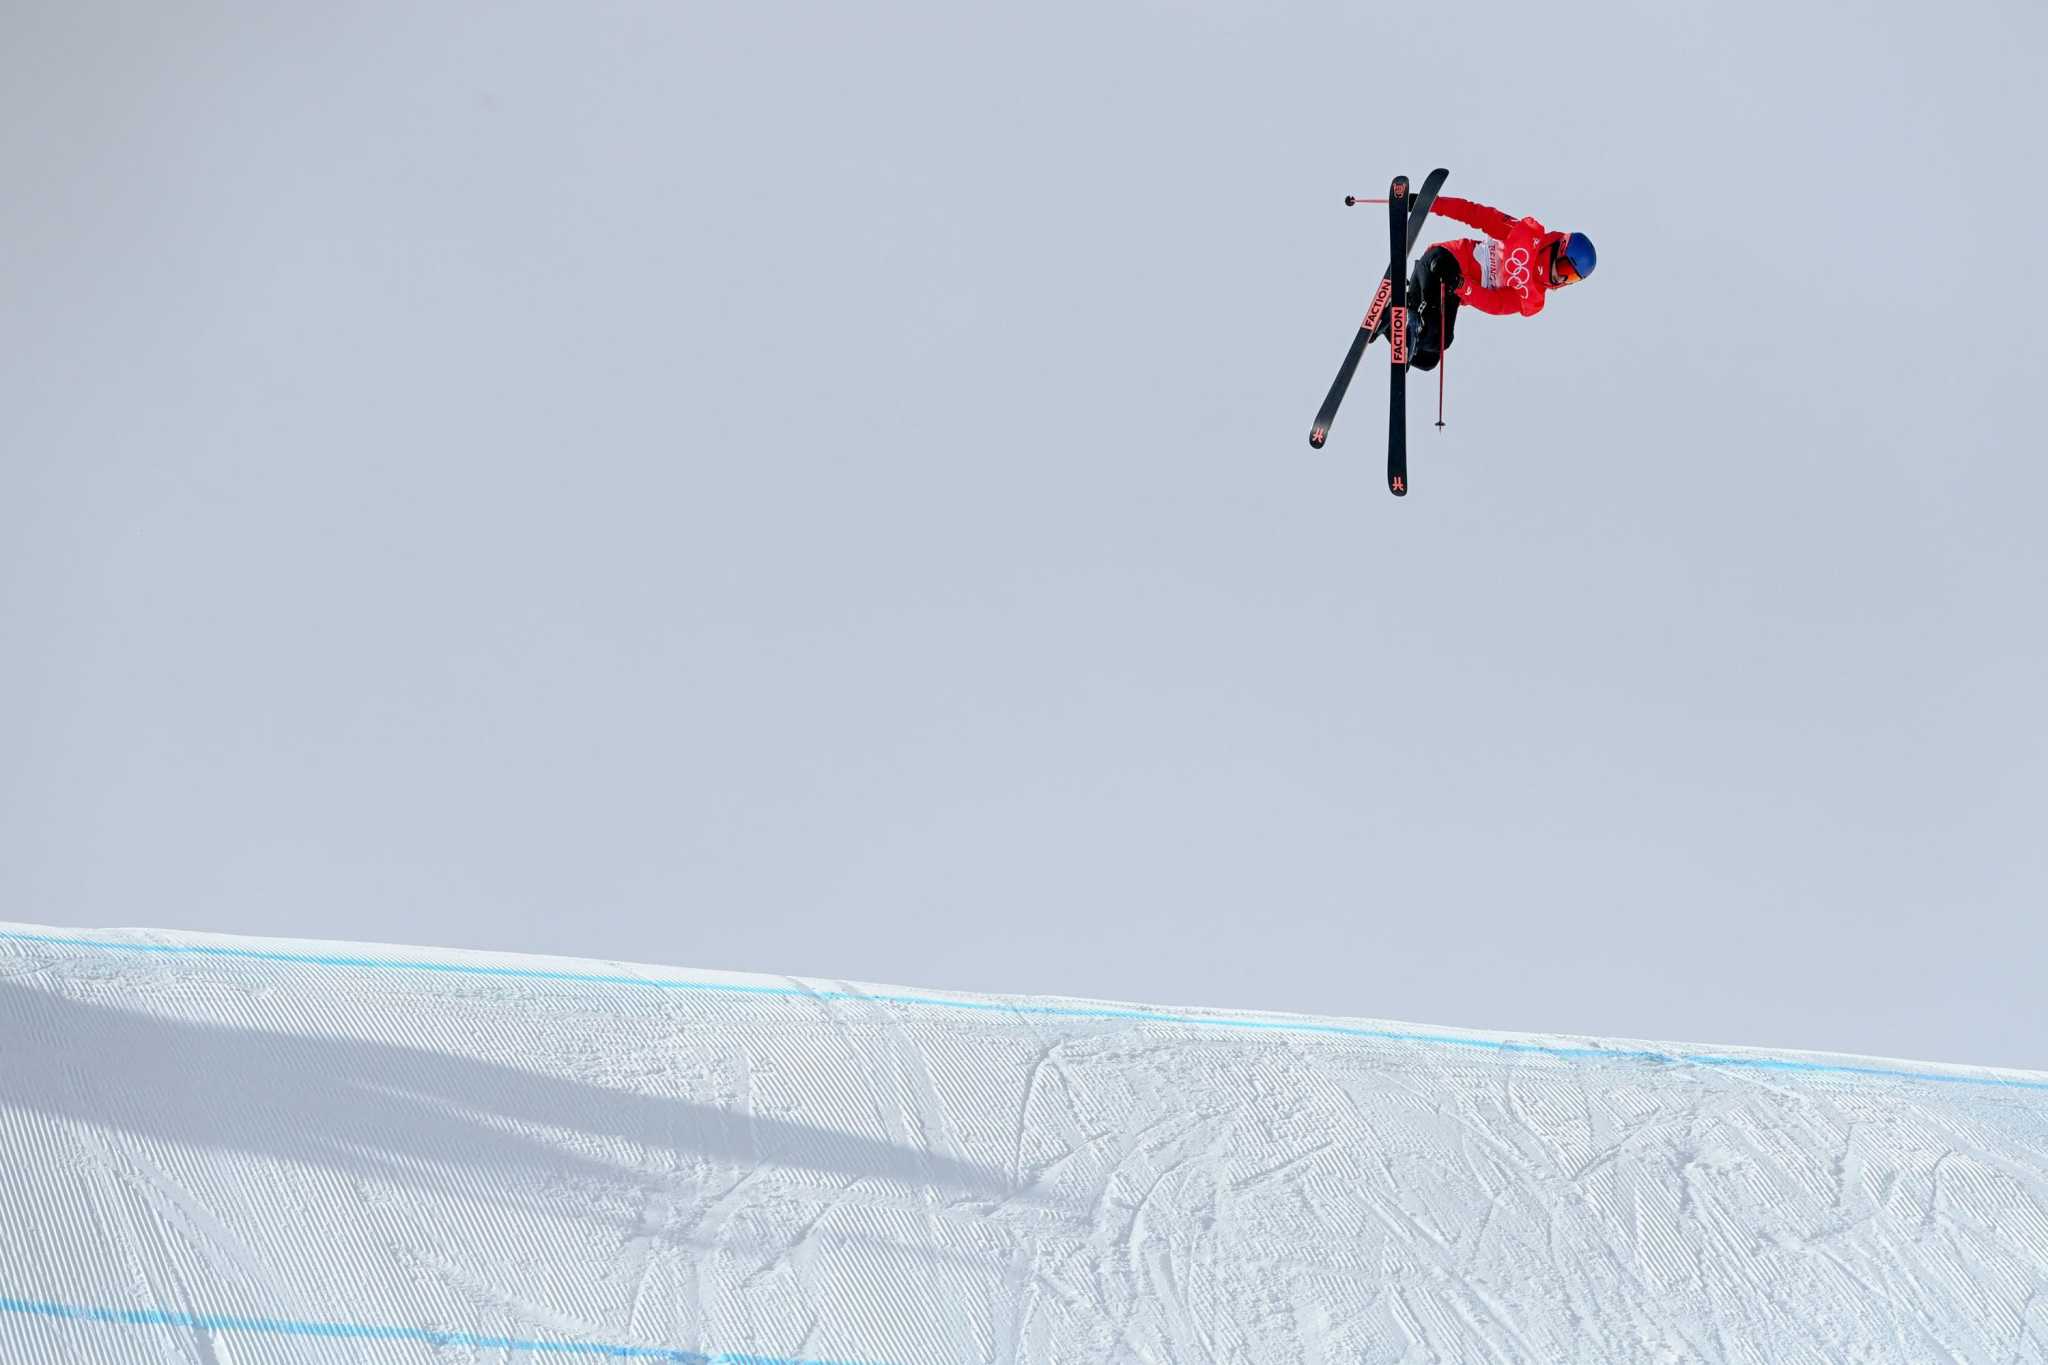 Eileen Gu Takes Silver in Slopestyle - The New York Times